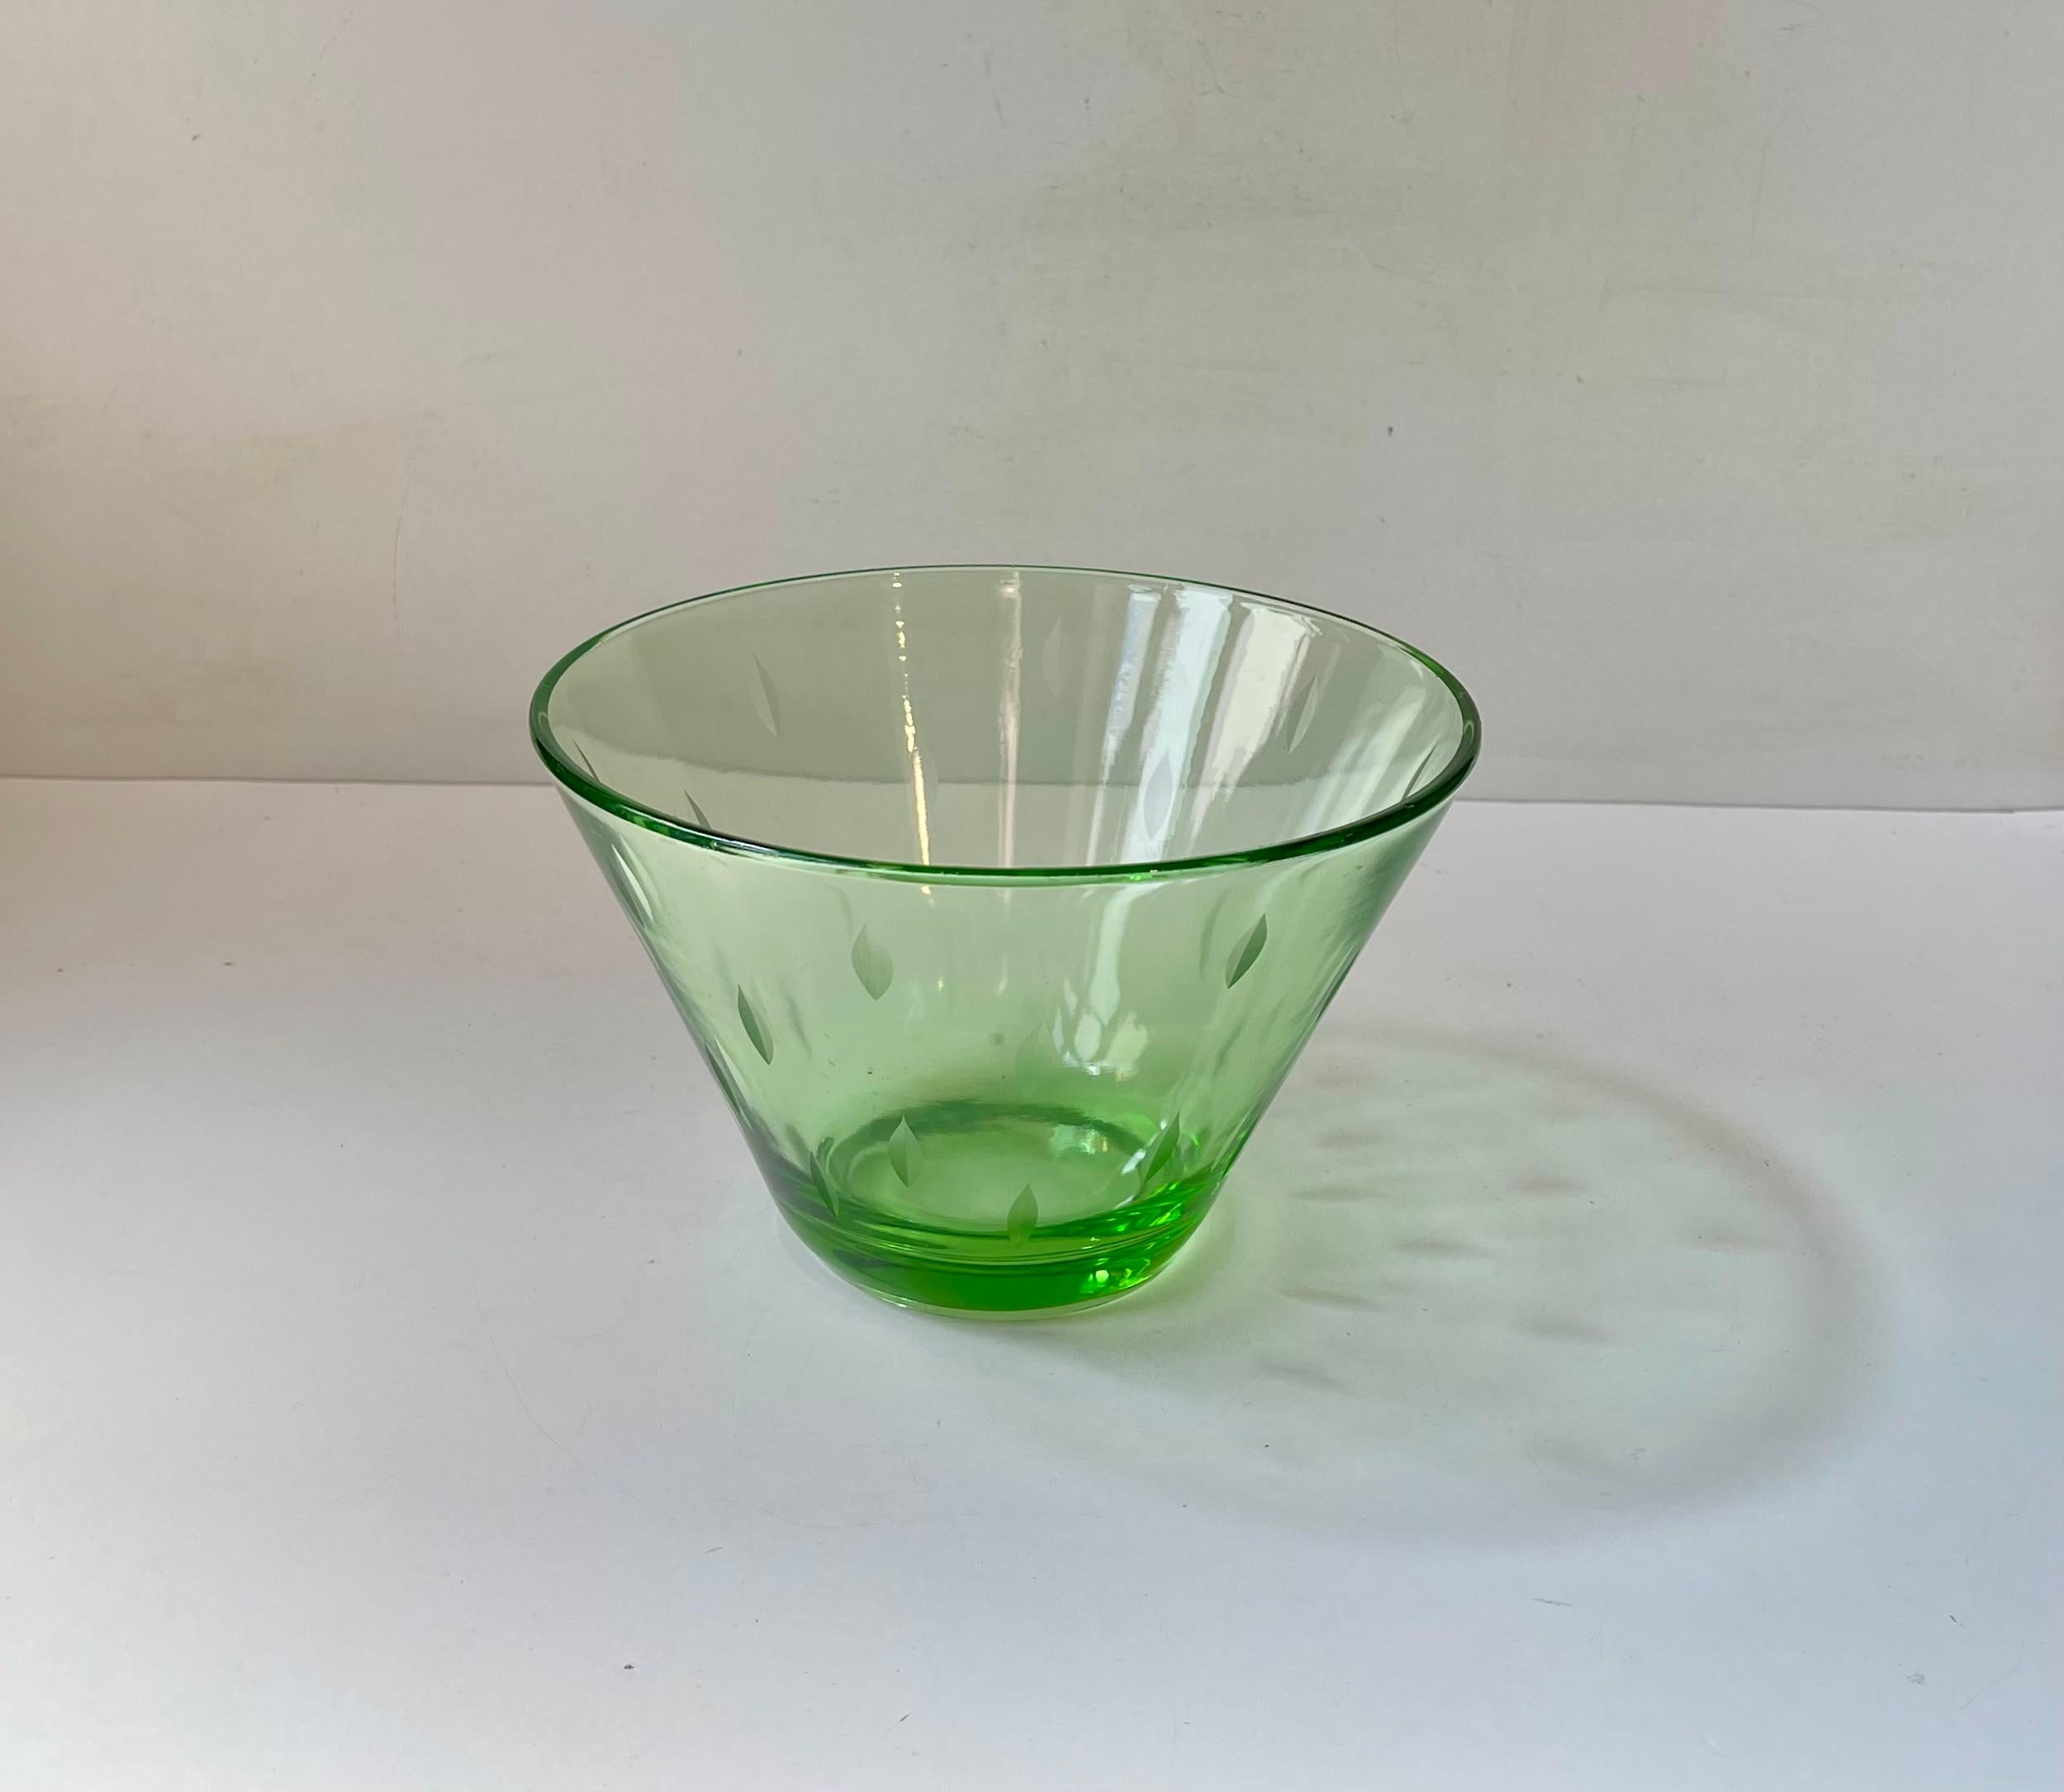 Exceptionally rare green uranium semi-conical glass bowl by Jacob E. Bang in his 'no name' art glass series for Holmegaard/Kastrup in Denmark circa 1935. It decorated with cut stylized arrows. A splendid piece for any functionalist or Art Deco